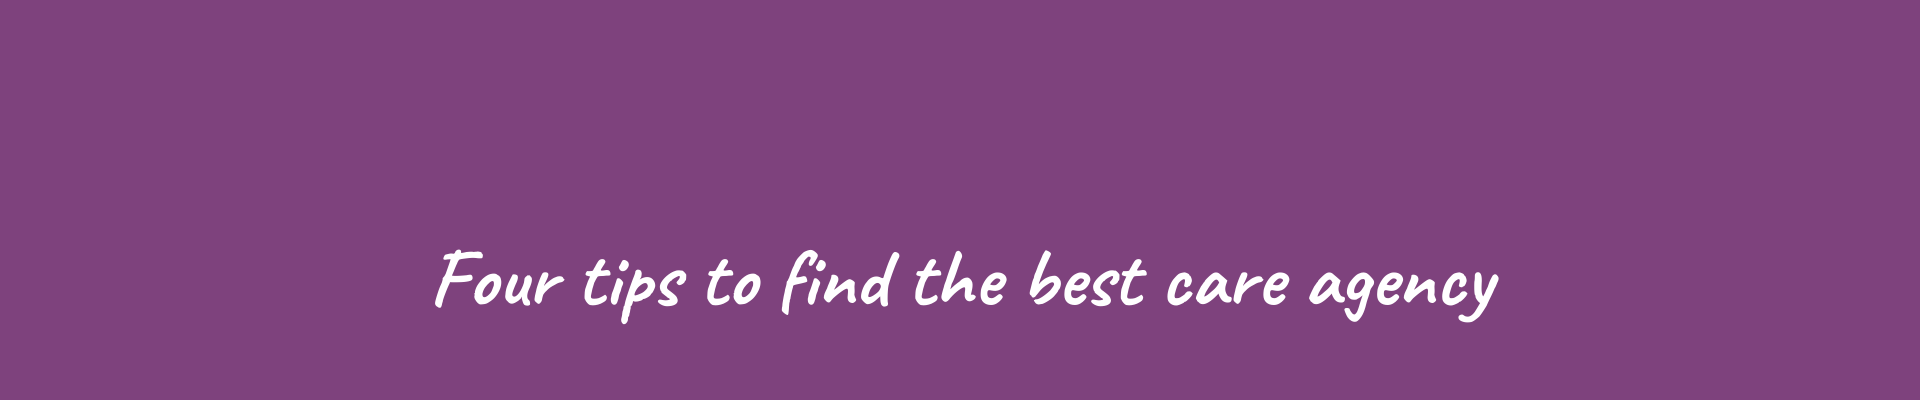 find a care agency banner